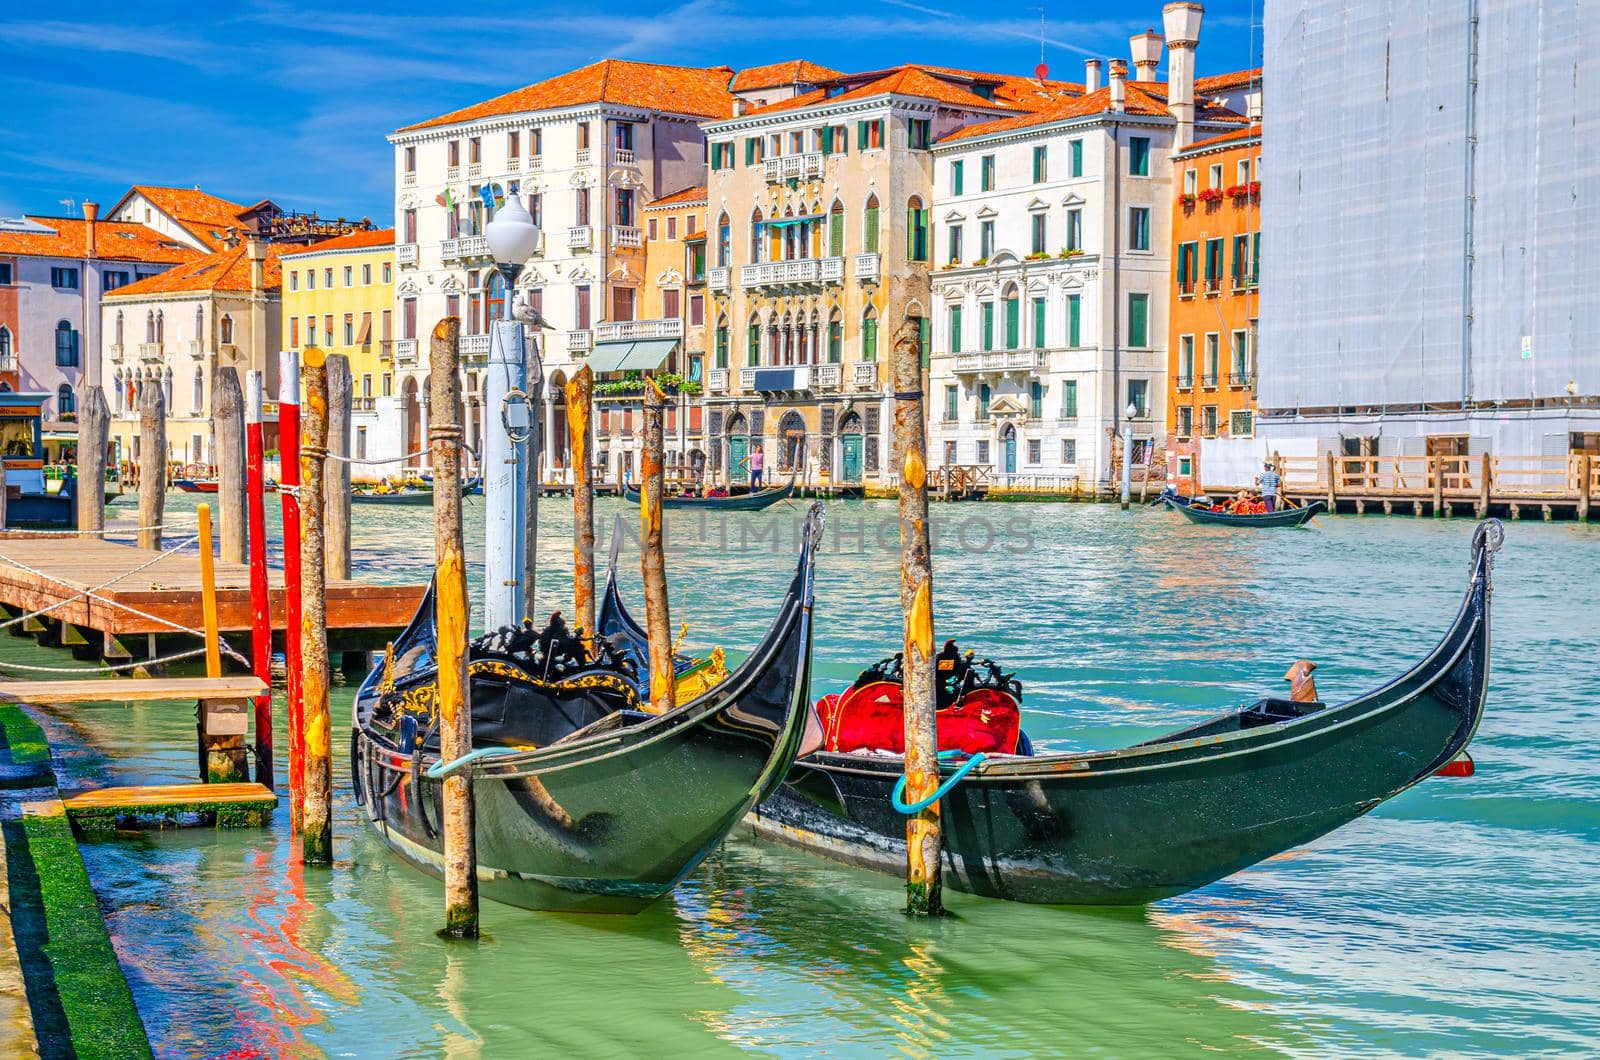 Gondolas traditional boats moored in wooden pier dock of Grand Canal waterway in Venice historical city centre with row of colorful buildings Venetian architecture. Veneto Region, Northern Italy.